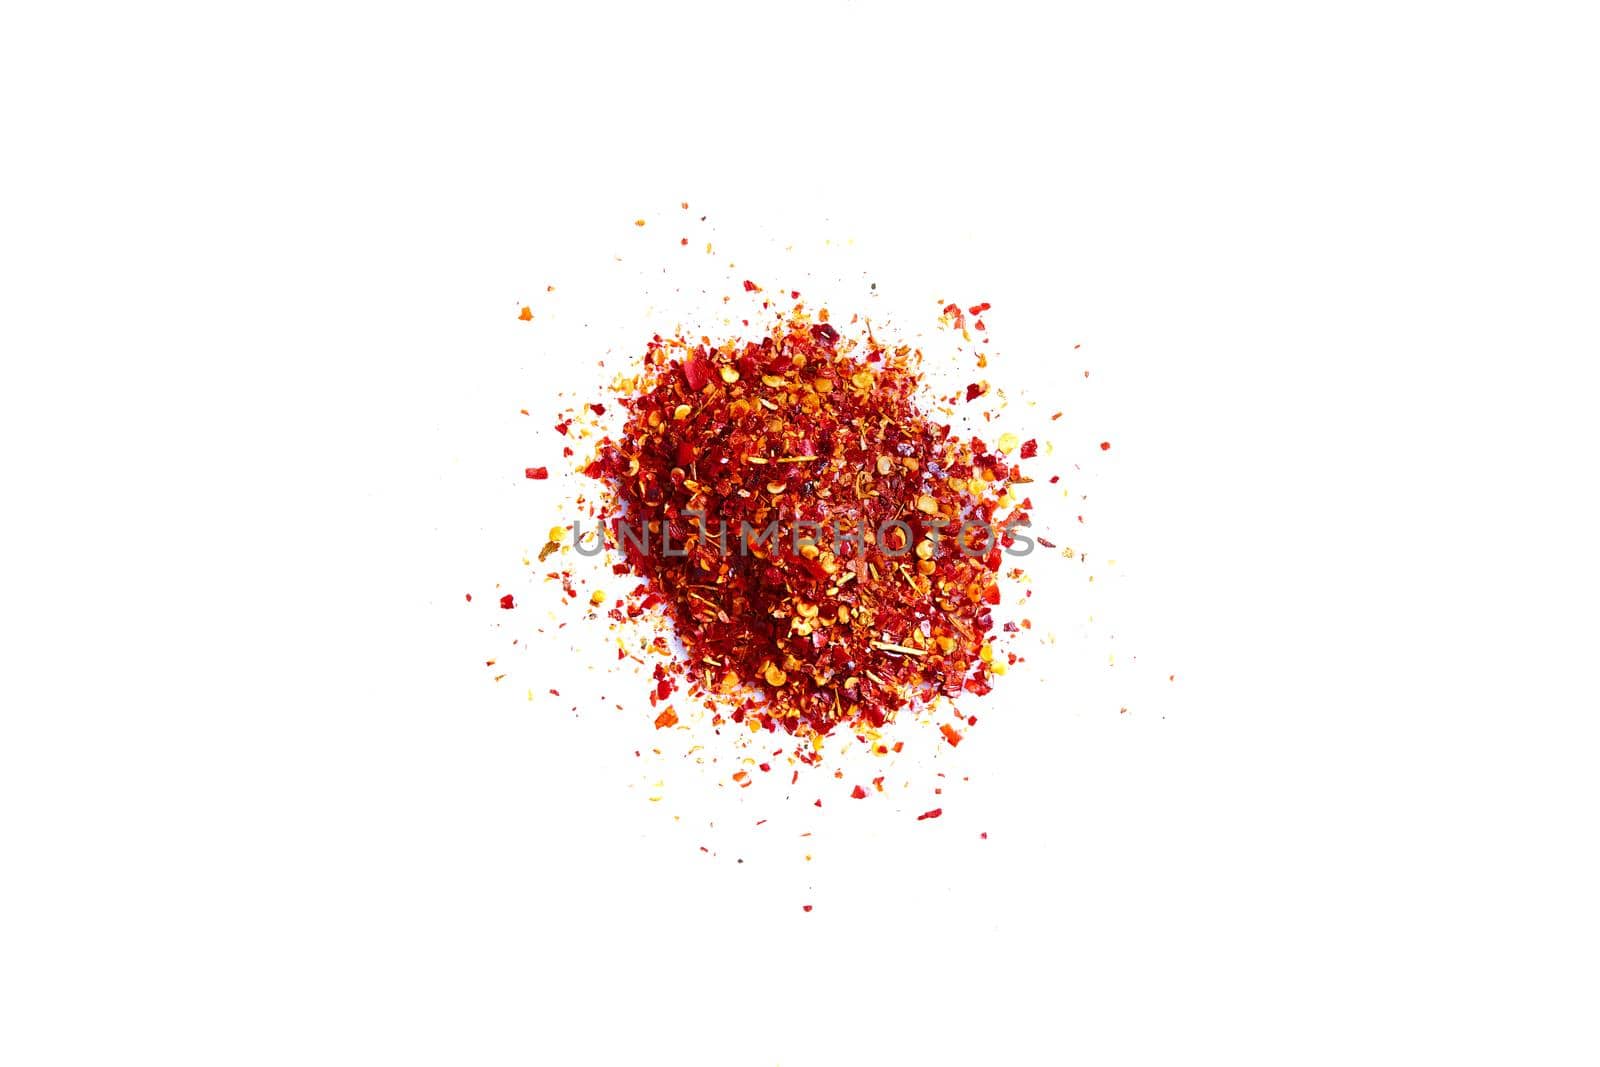 Crushed red pepper chilli pile from top on white background. Still life. Flat lay. Copy space. Spice